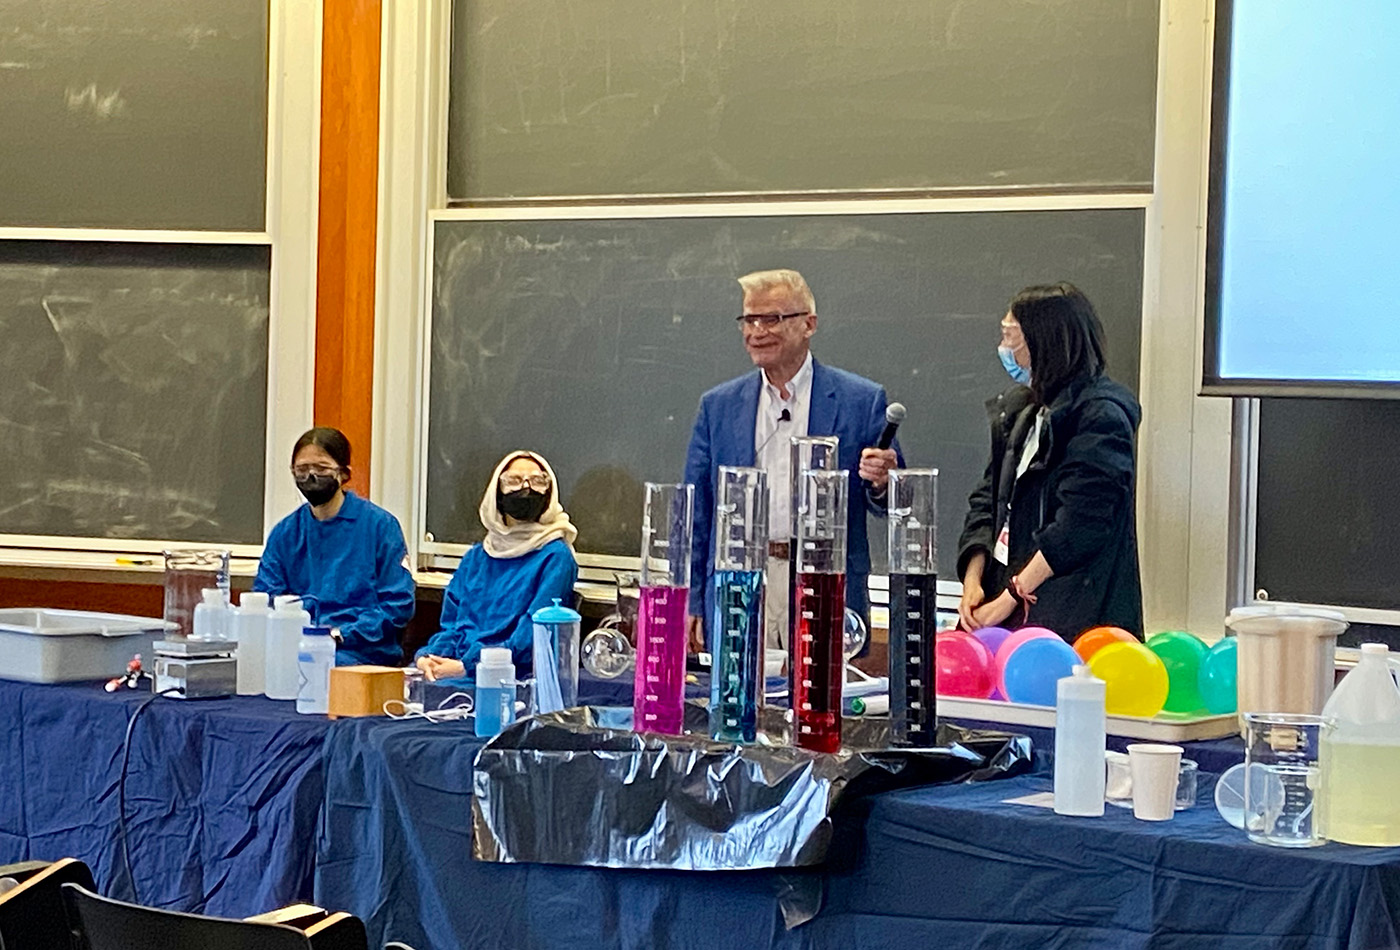 A white haired man stands beside a young woman with dark hair, in front of a table laden with various materials for science experiments.